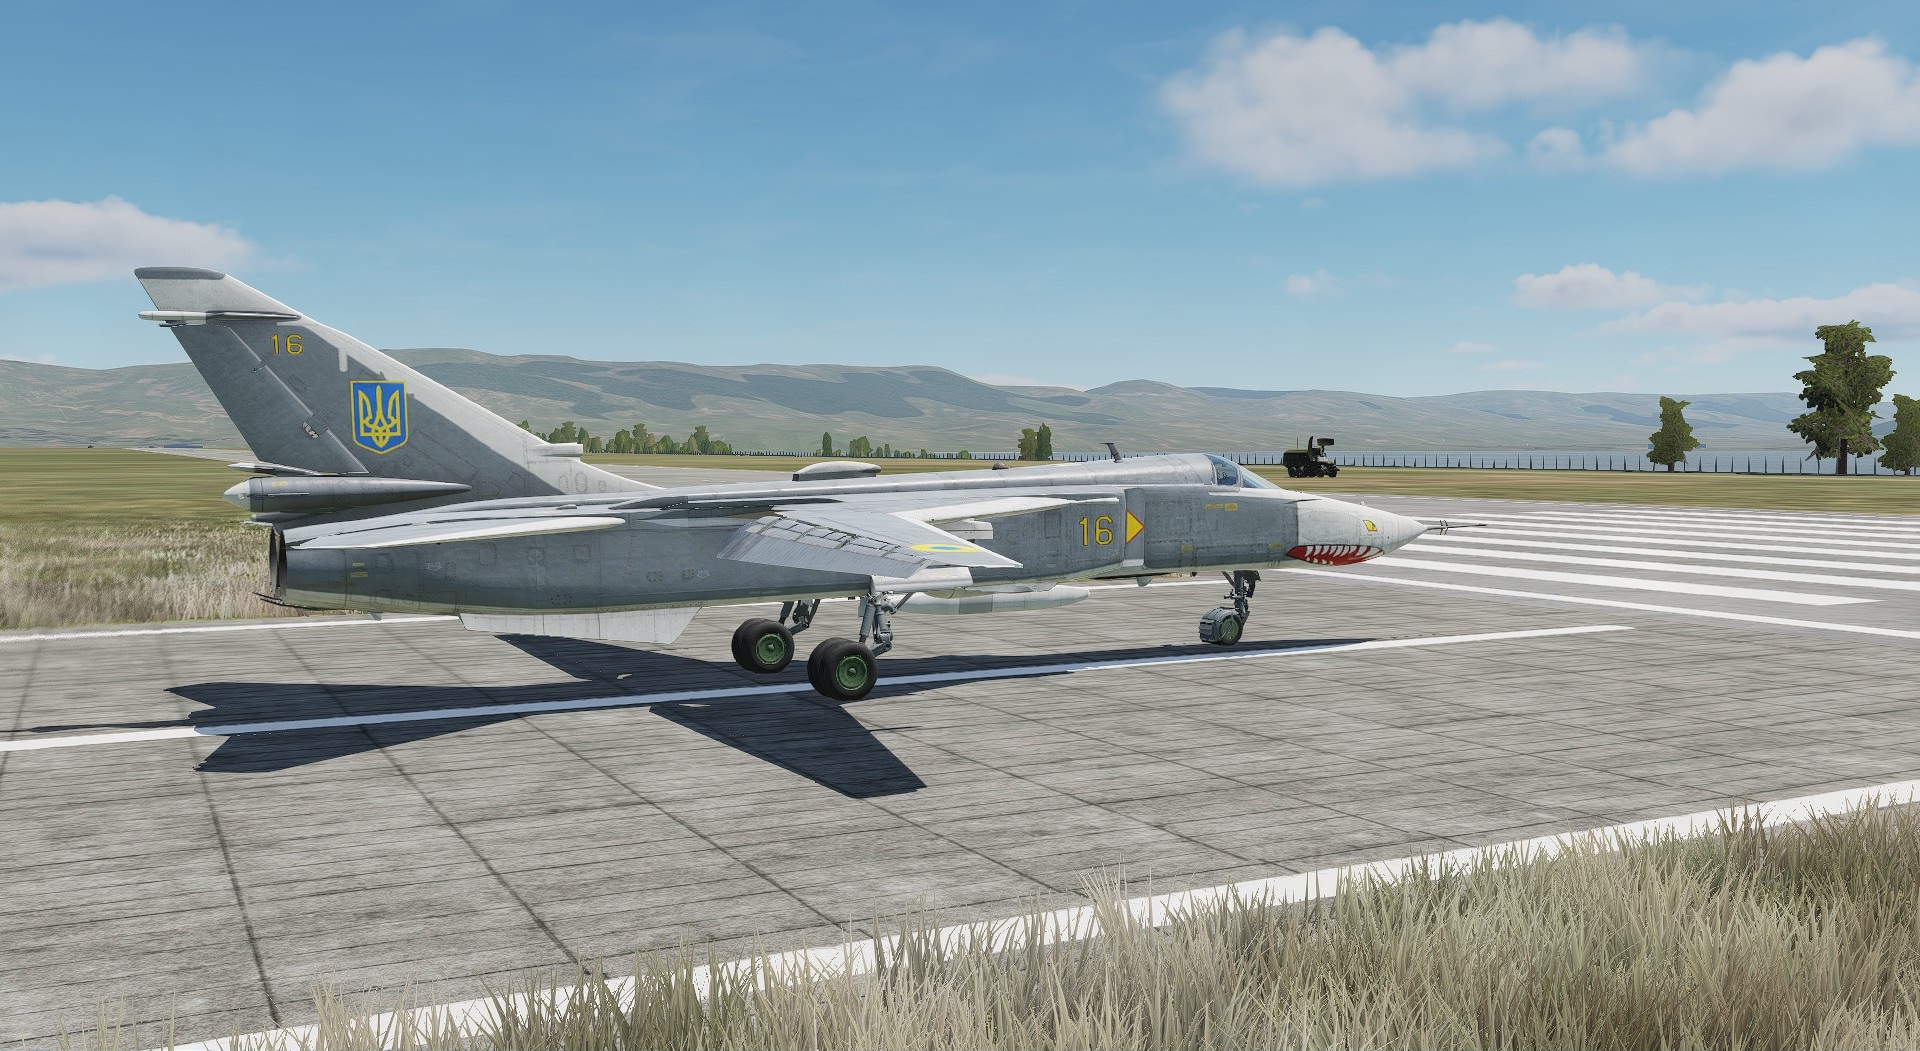 Su-24MR based on aircraft No.16 form 7th Tactical Aviation Brigade of Ukrainian Air Force